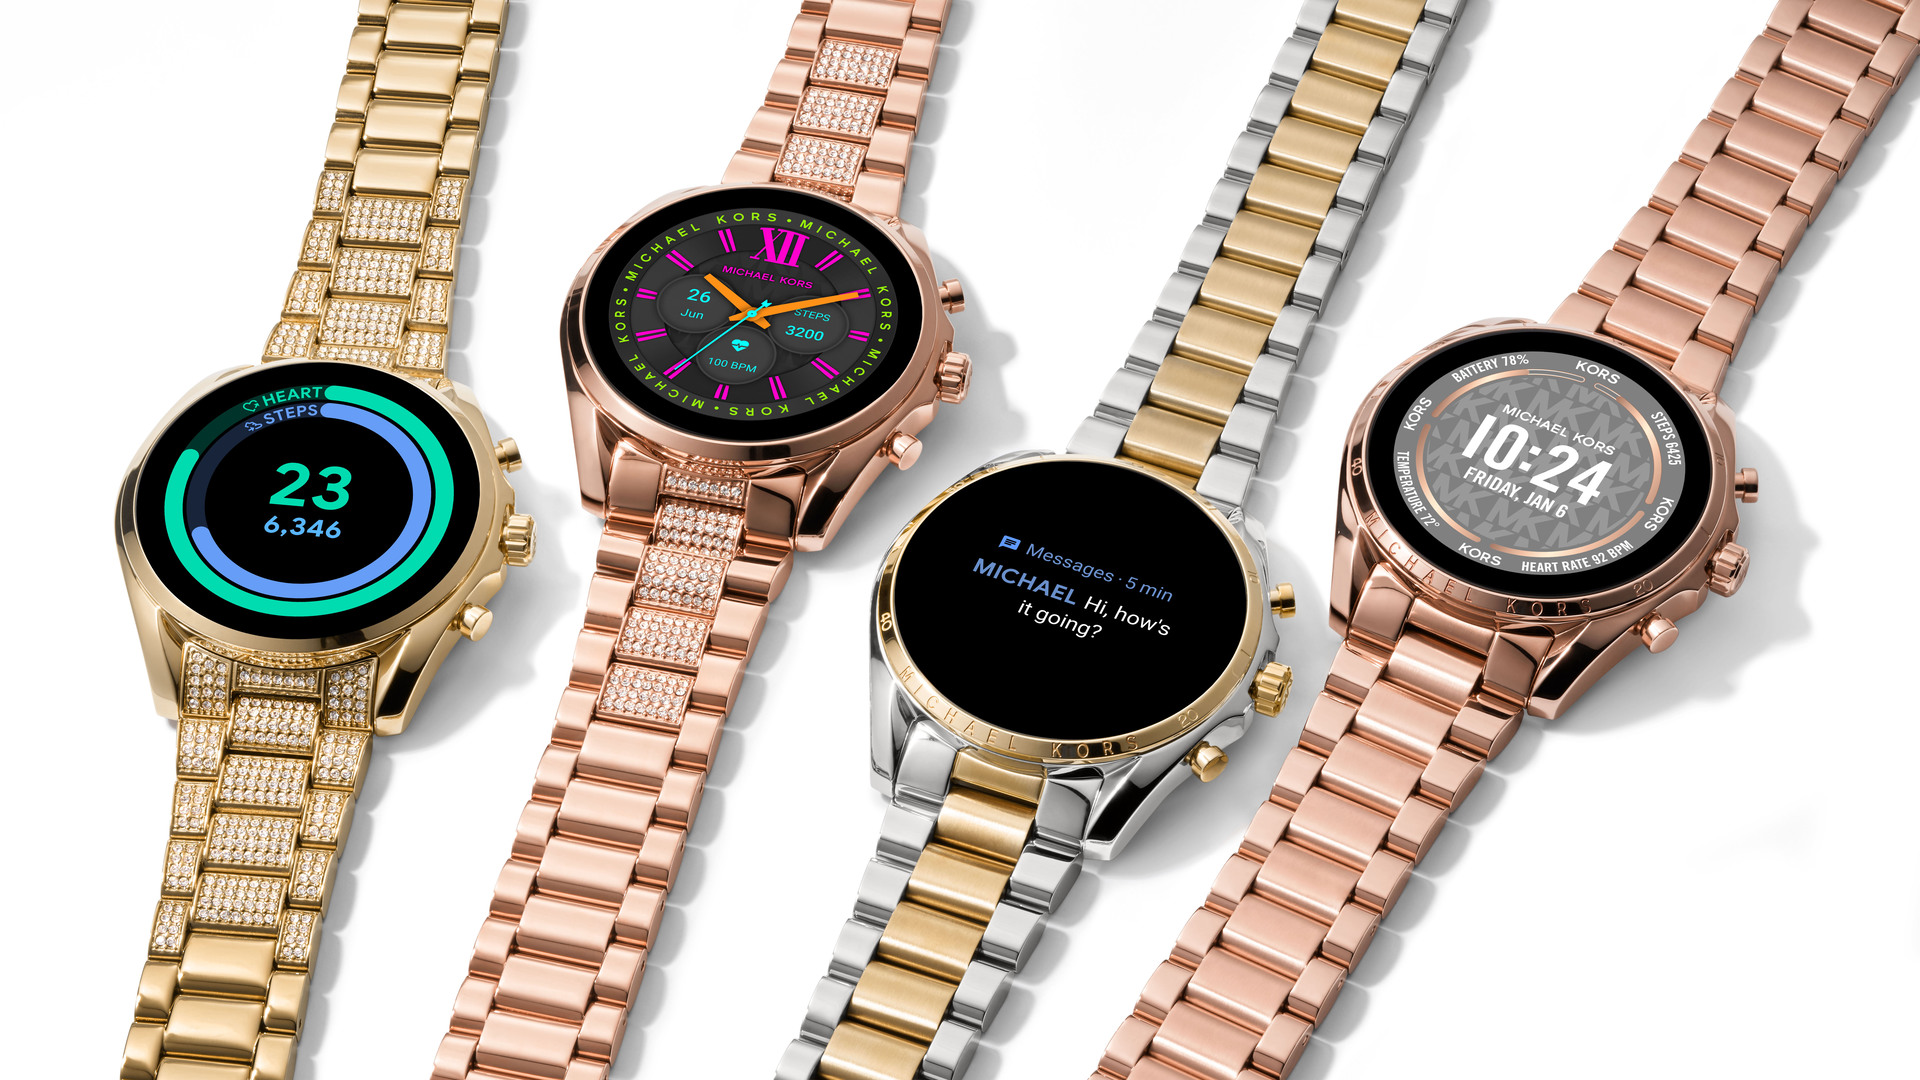 The Michael Kors Gen 6 smartwatch family lying flat on a table.